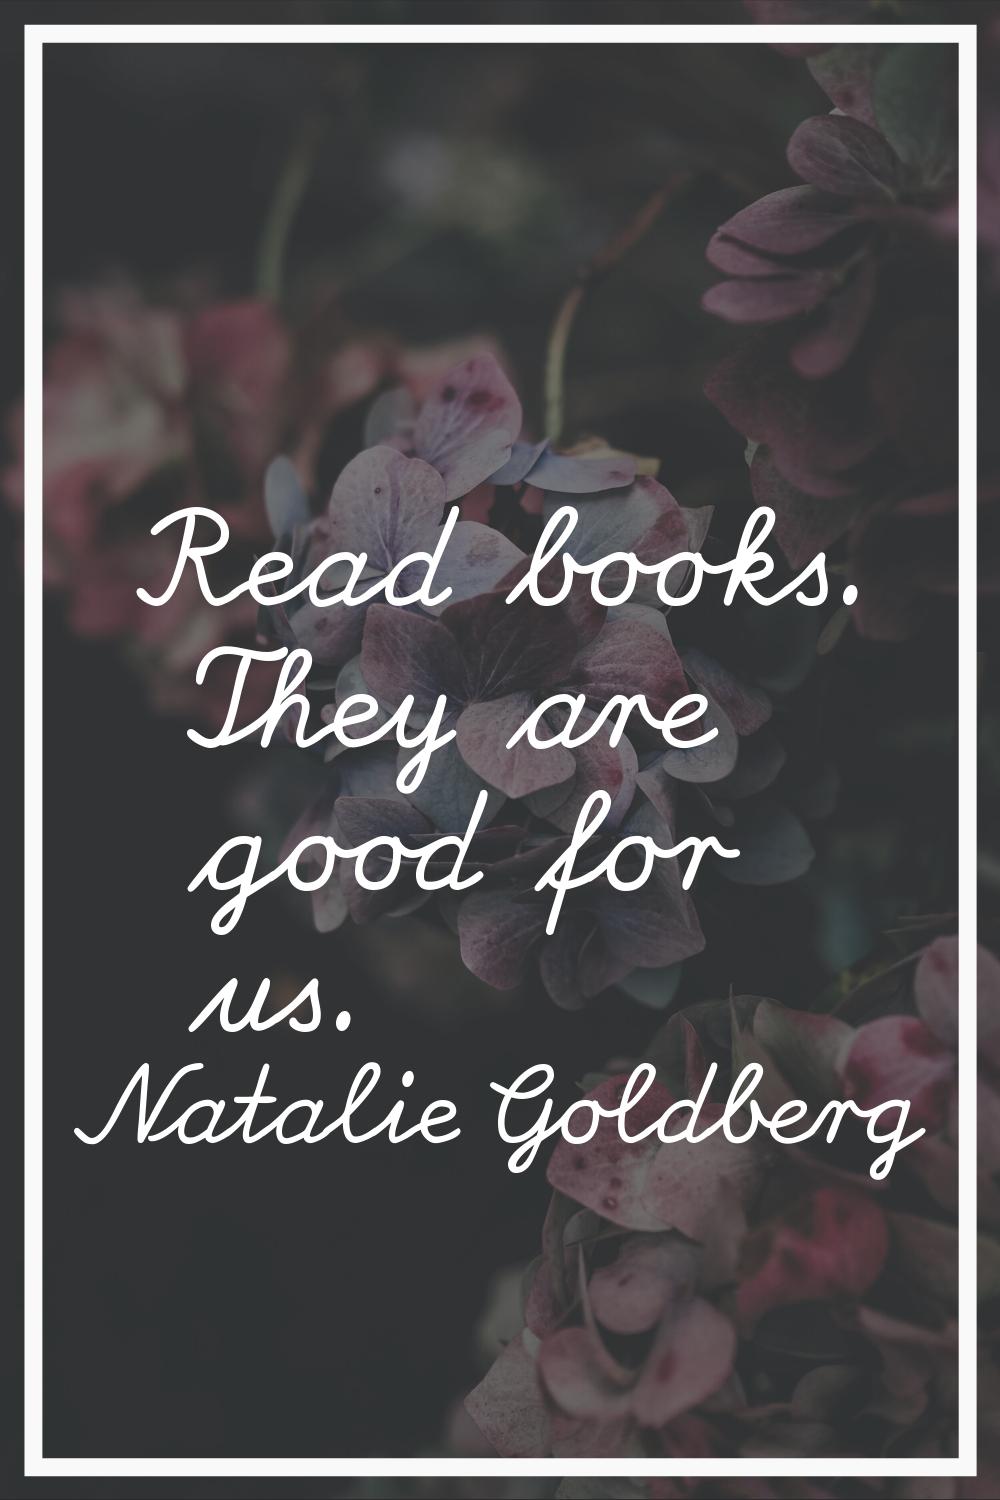 Read books. They are good for us.